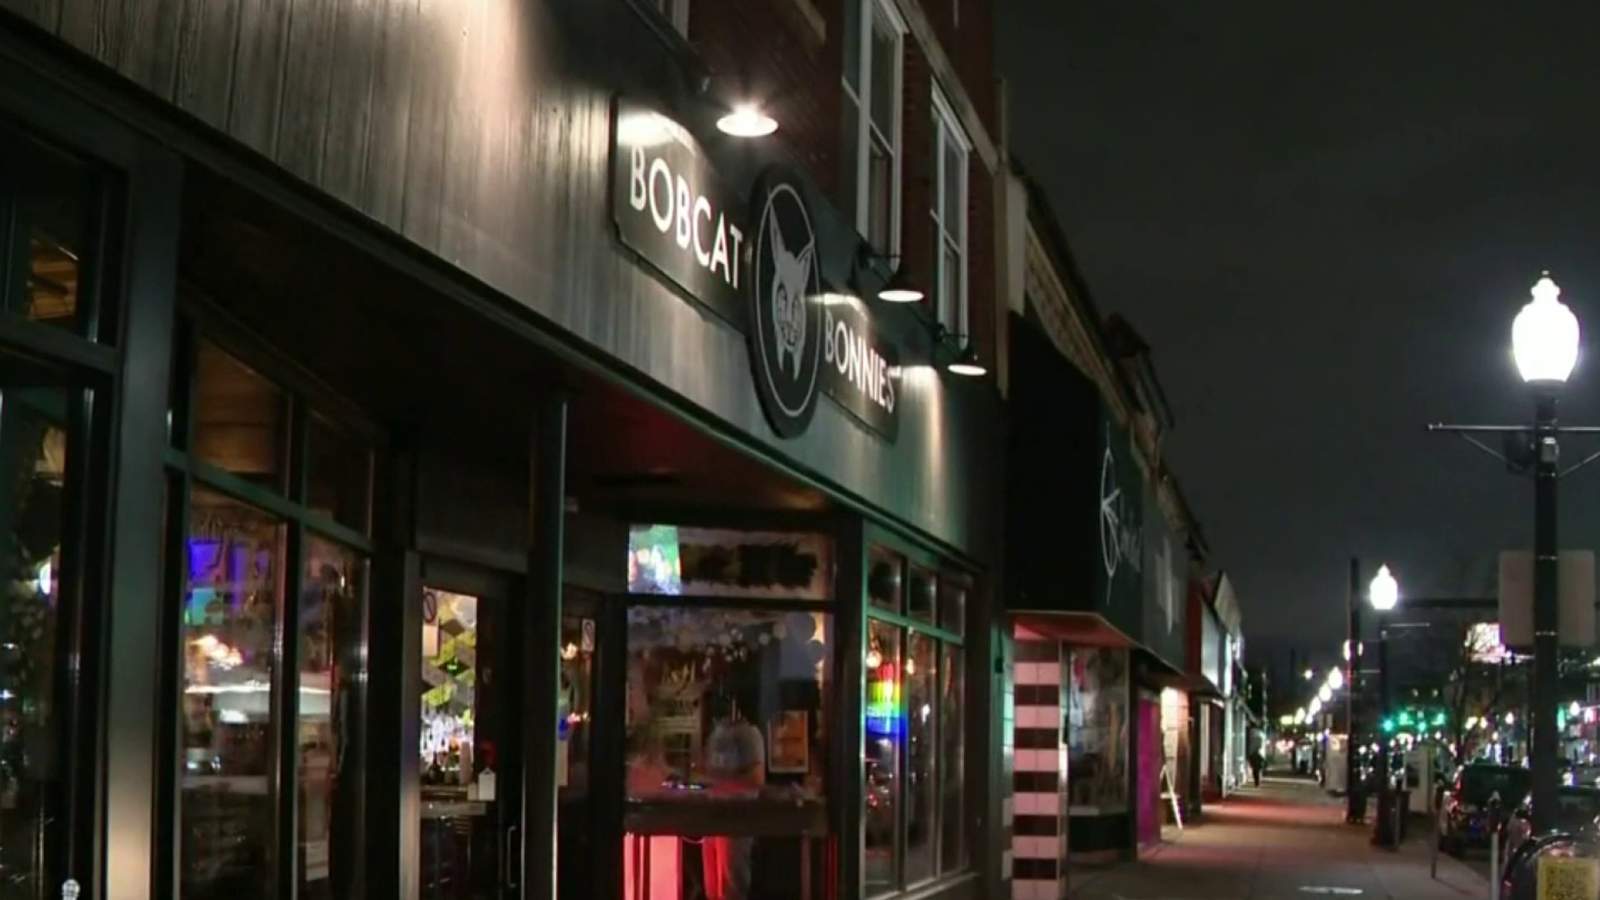 Restaurant owners weigh in on Michigan’s new COVID-19 emergency order